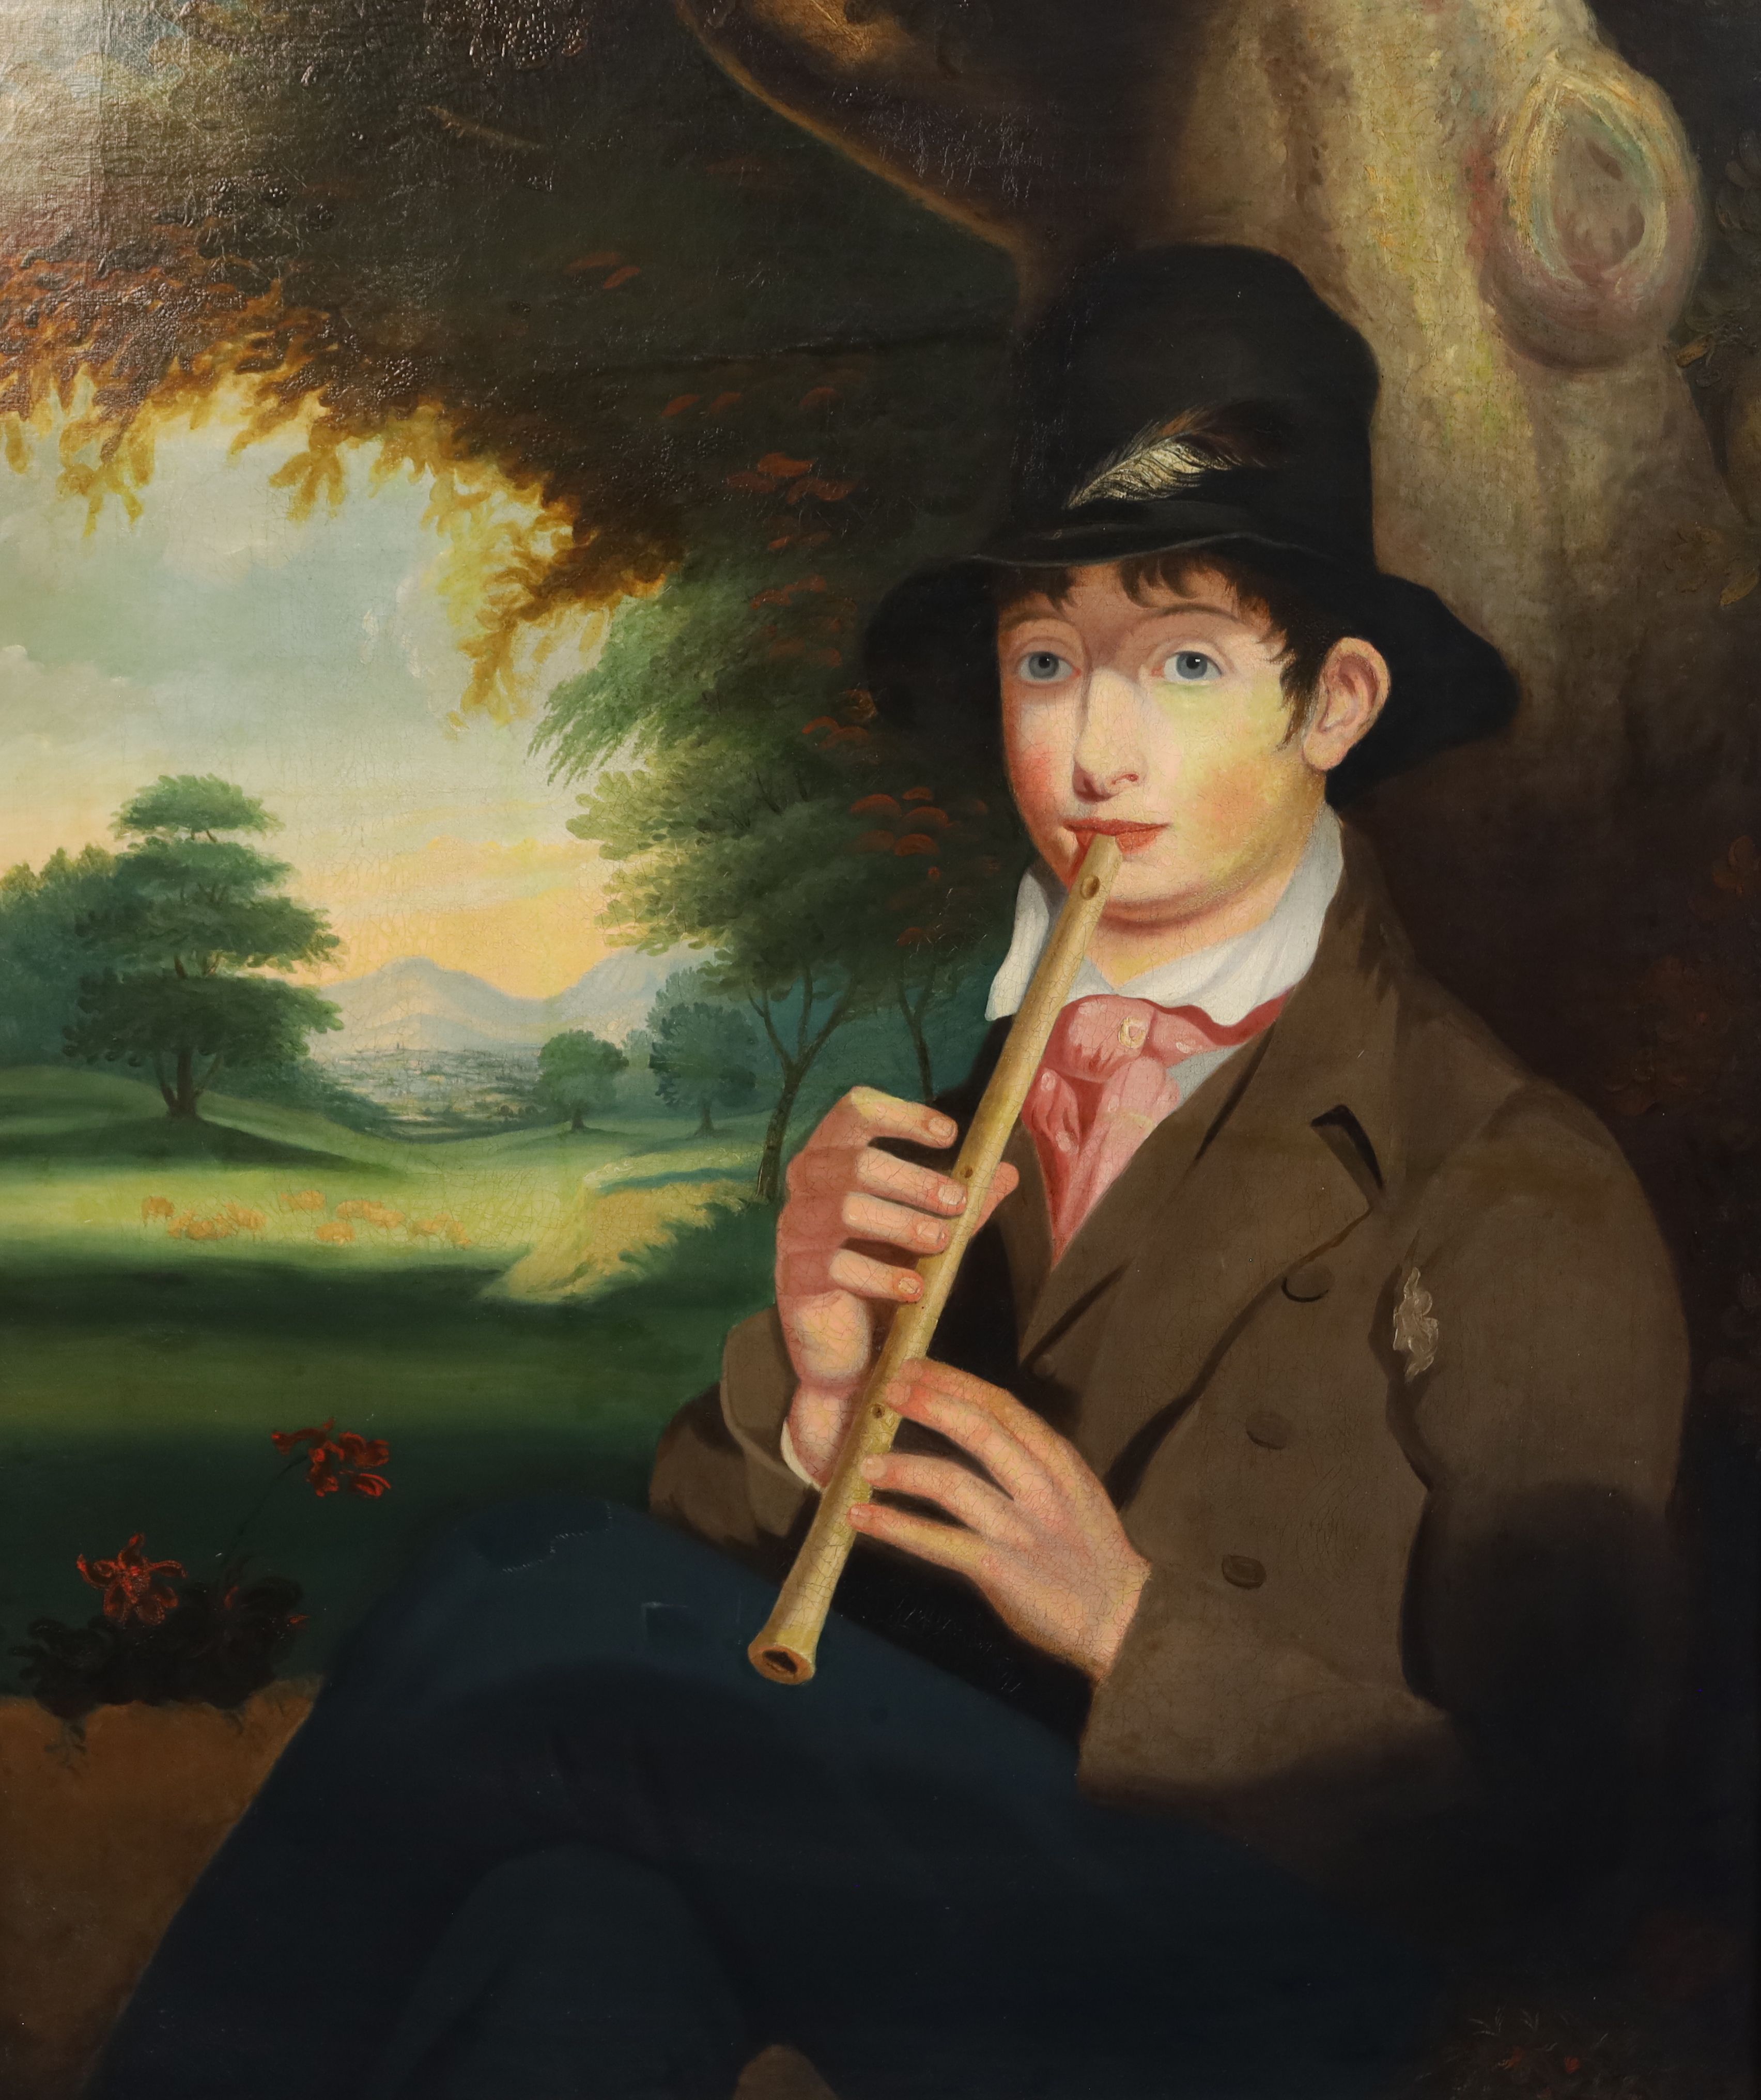 English School c.1840 Naive portrait of a pipe player seated in a pastoral landscape 35. x 28in.